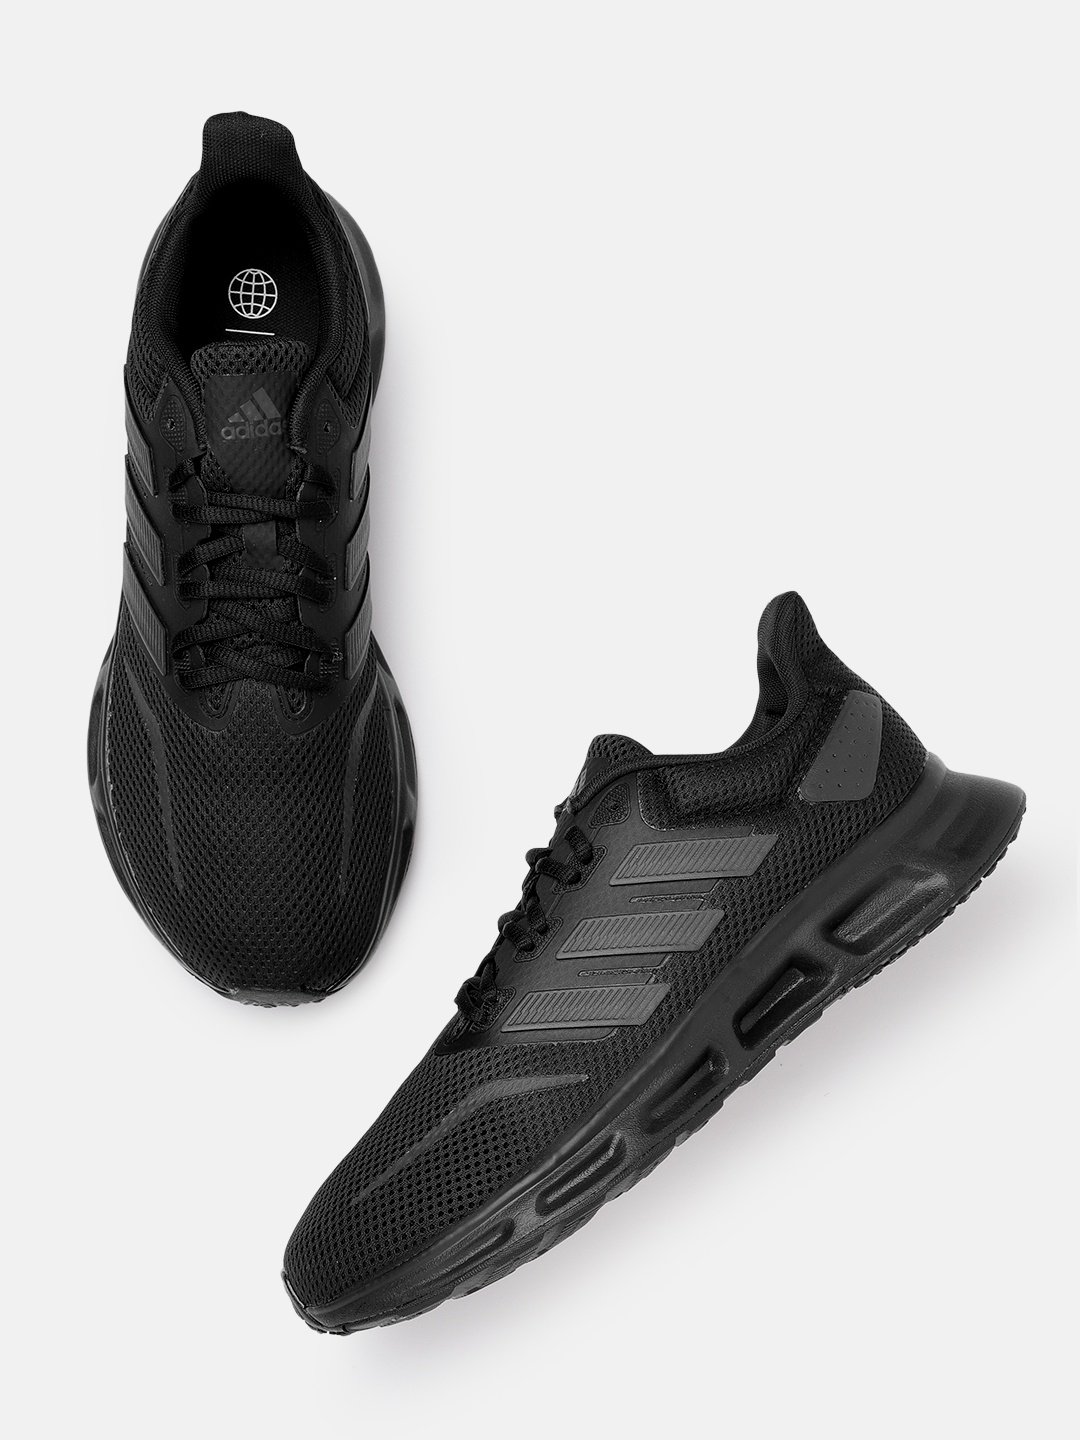 

ADIDAS Unisex Black Woven Design Show The Way 2.0 Sustainable Running Shoes